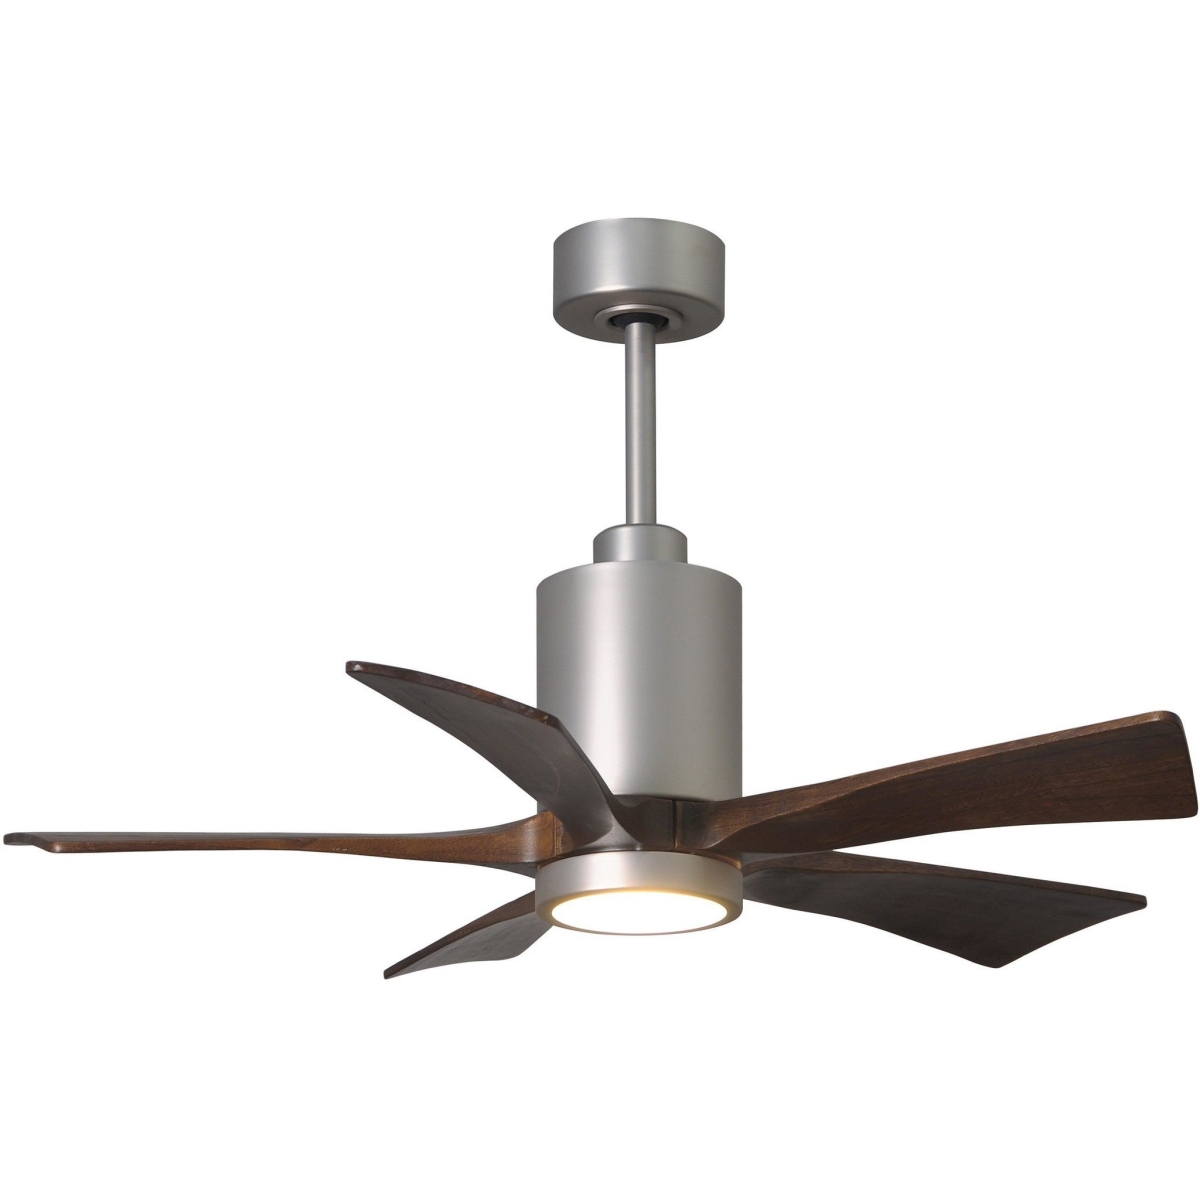 Picture of Atlas PA5-BN-WA-42 42 in. Three Bladed Paddle Fan with LED Light Kit in Brushed Nickel